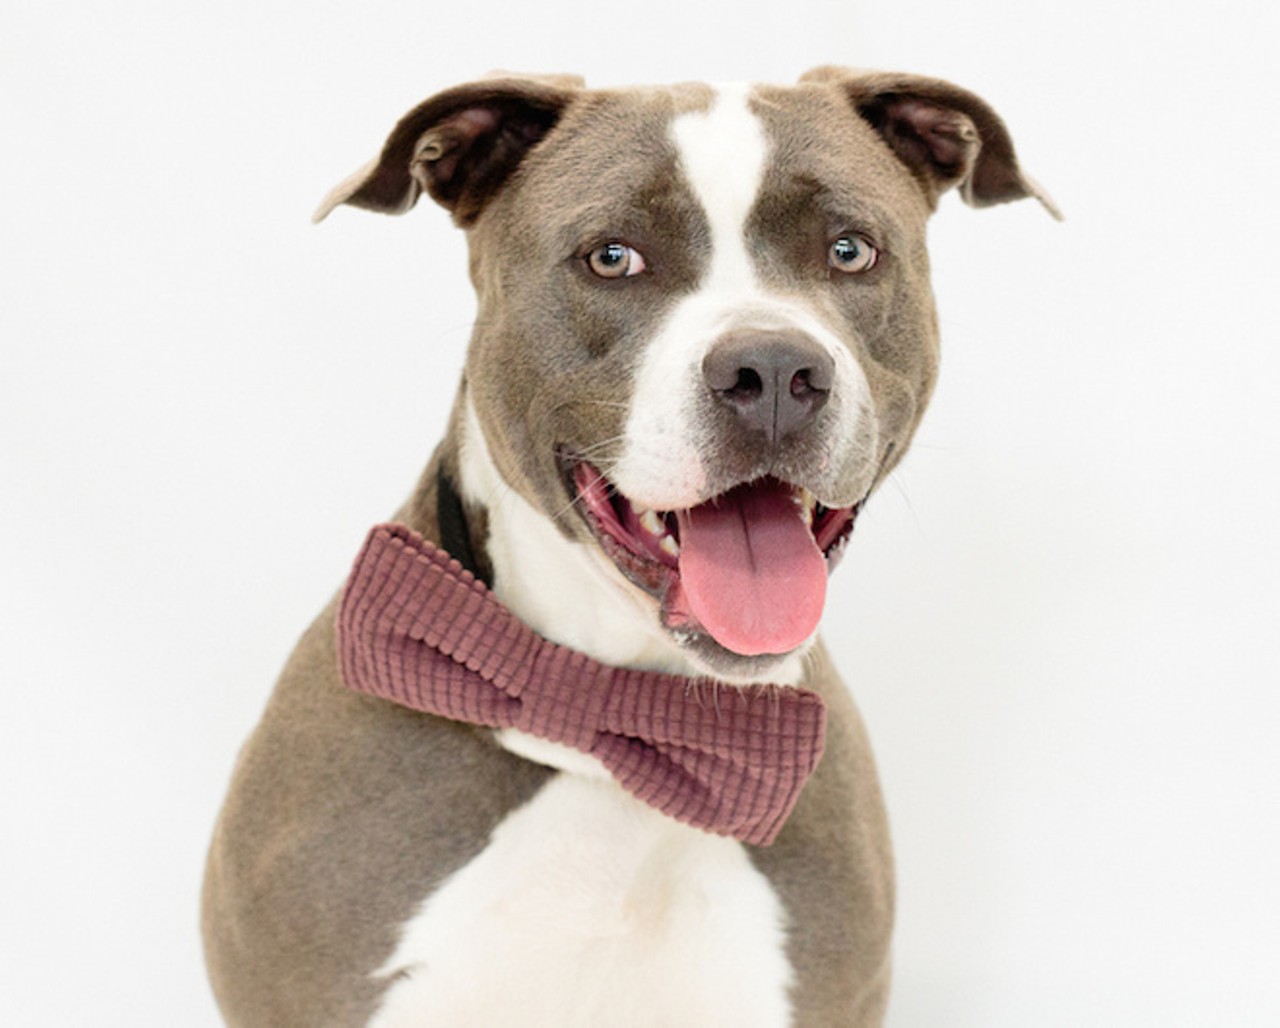 Are you lonesome tonight? Here are 24 adoptable dogs who'll keep you company